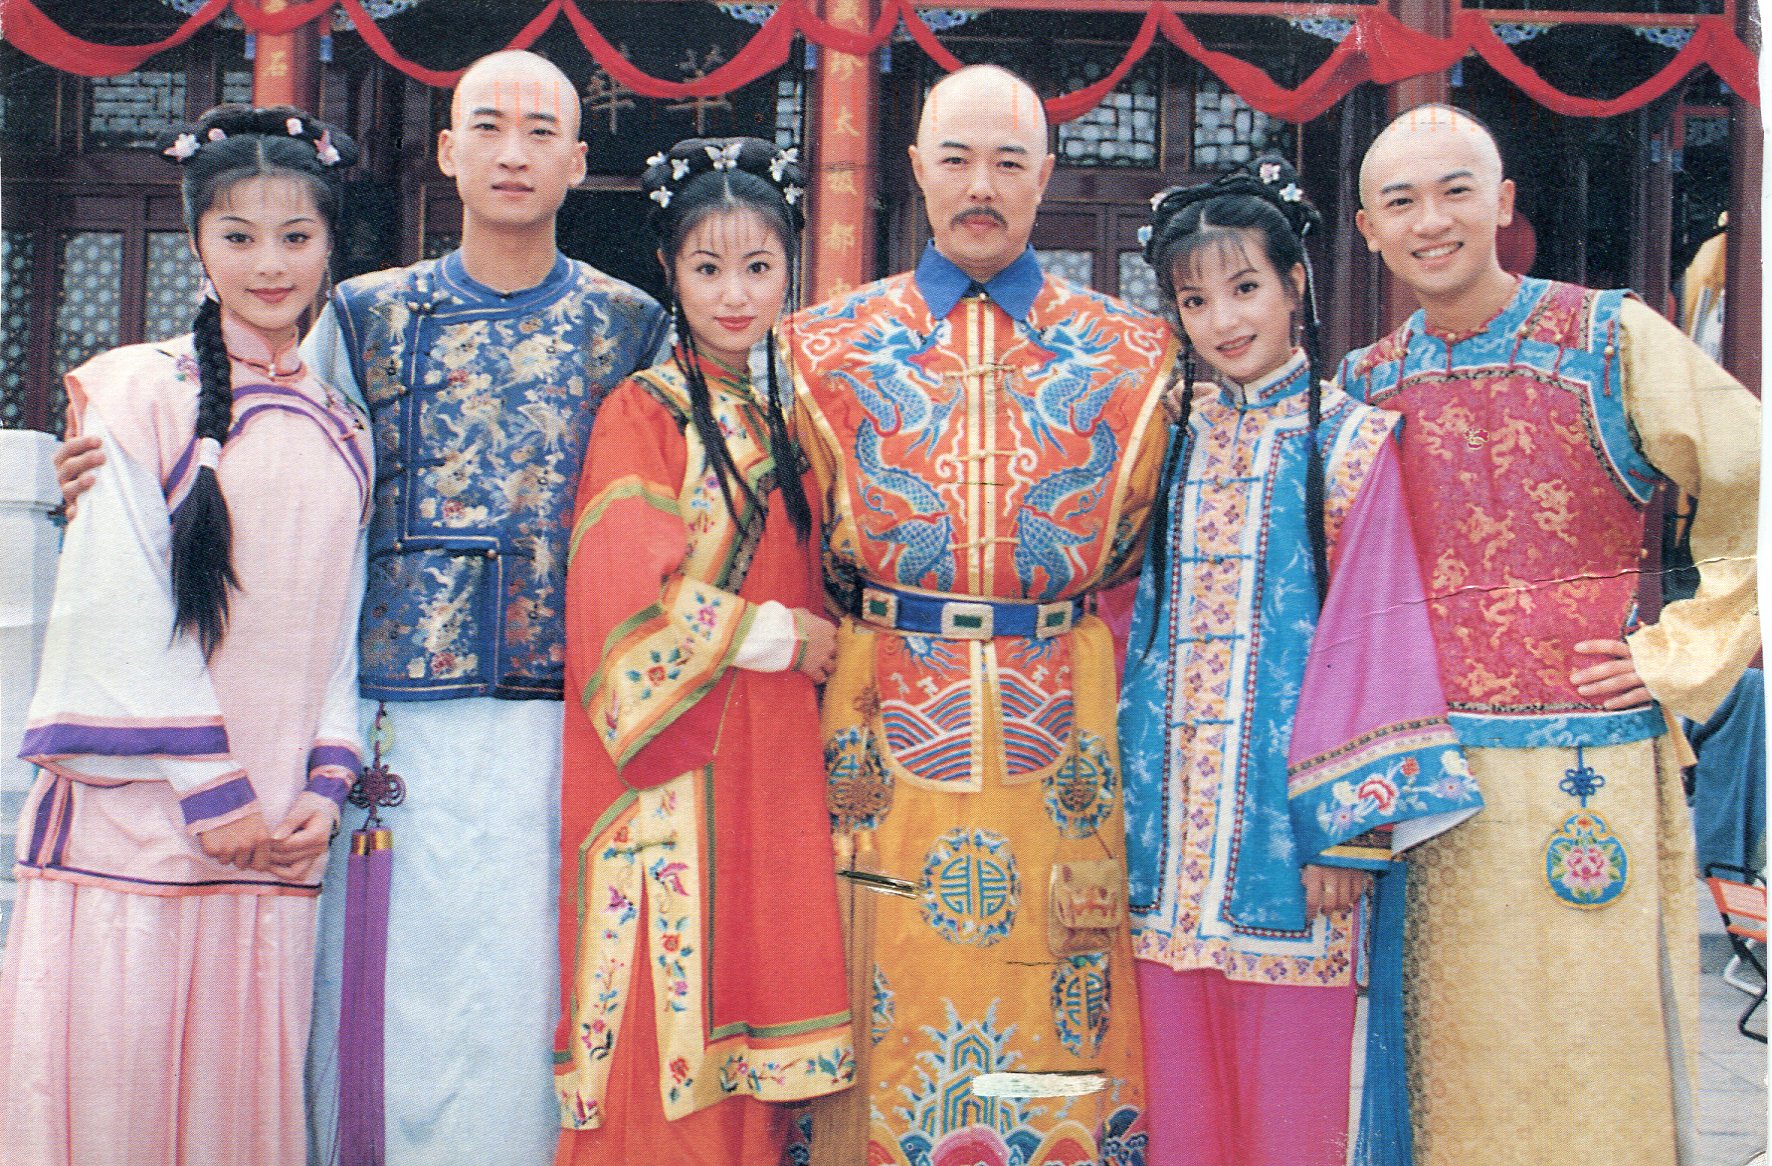 CHINESE TRADITIONAL CULTURAL DRESS China-people-in-traditional-clothes